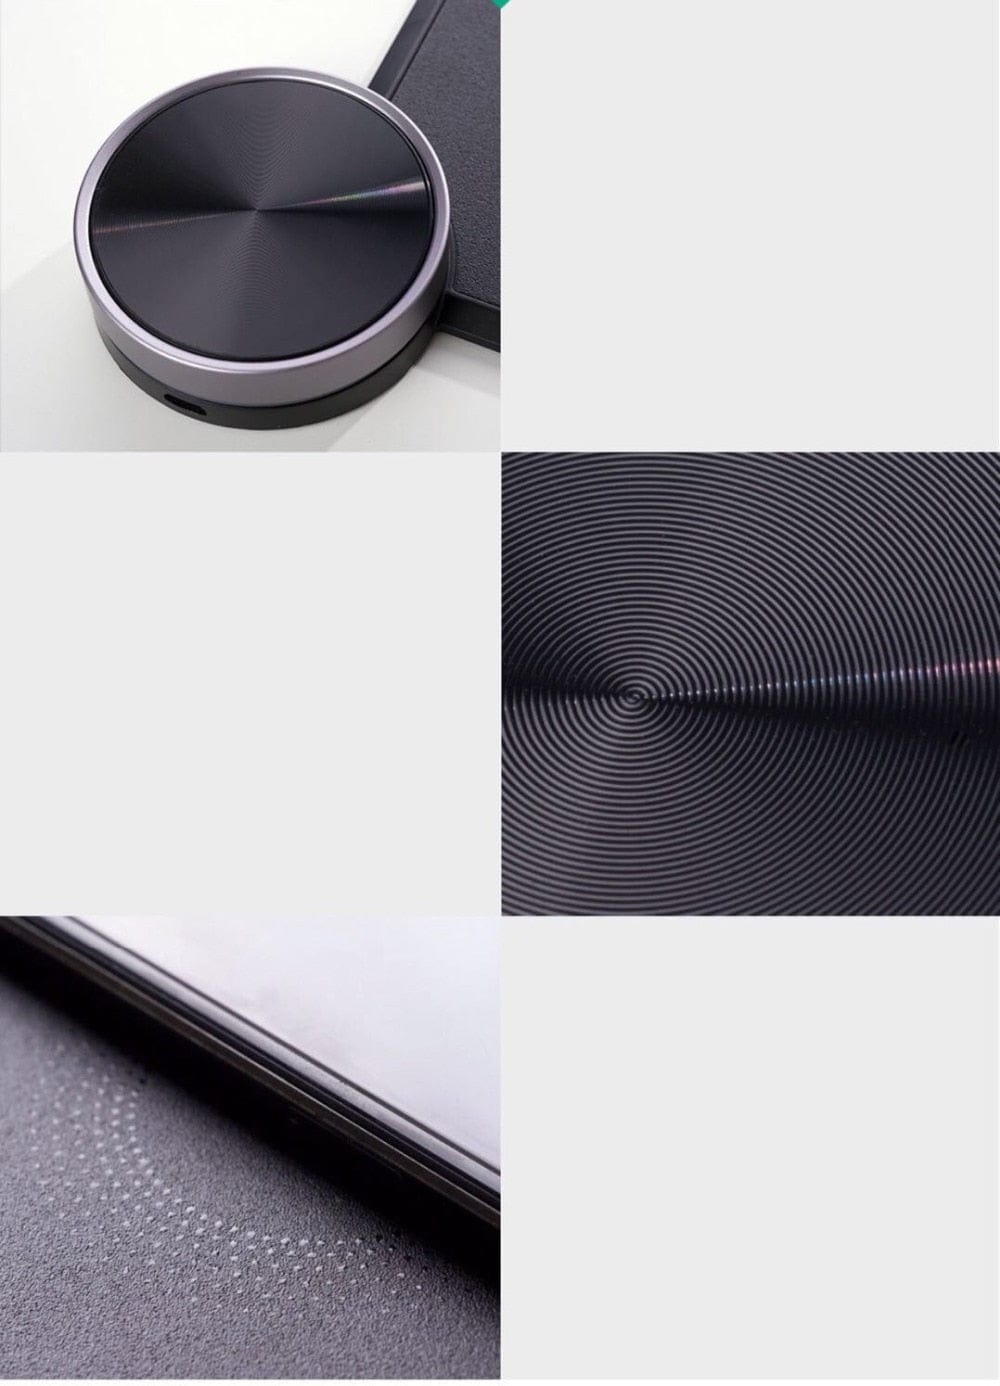 Smart Tech Shopping Mouse Pad black Youpin Smart Mouse Pad, Qi Wireless Charging For Xiaomi Mi Mix 2S Iphonex Fast Charge Gaming Mouse Pad Wireless Charger for Game